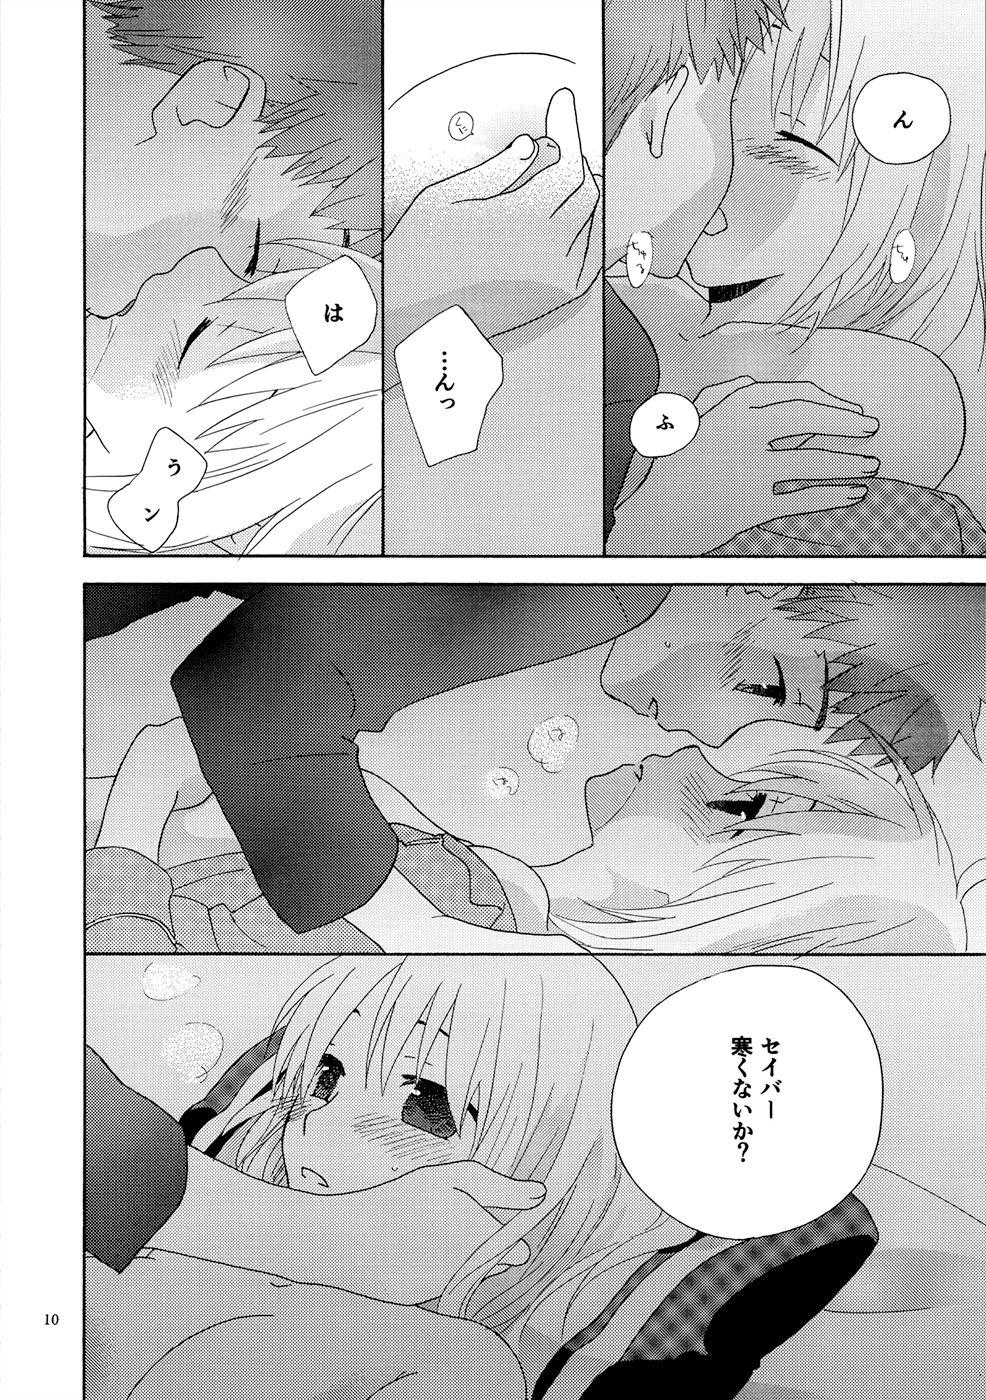 Sloppy Blowjob POP STAR - Fate stay night Real Amateur Porn - Page 9